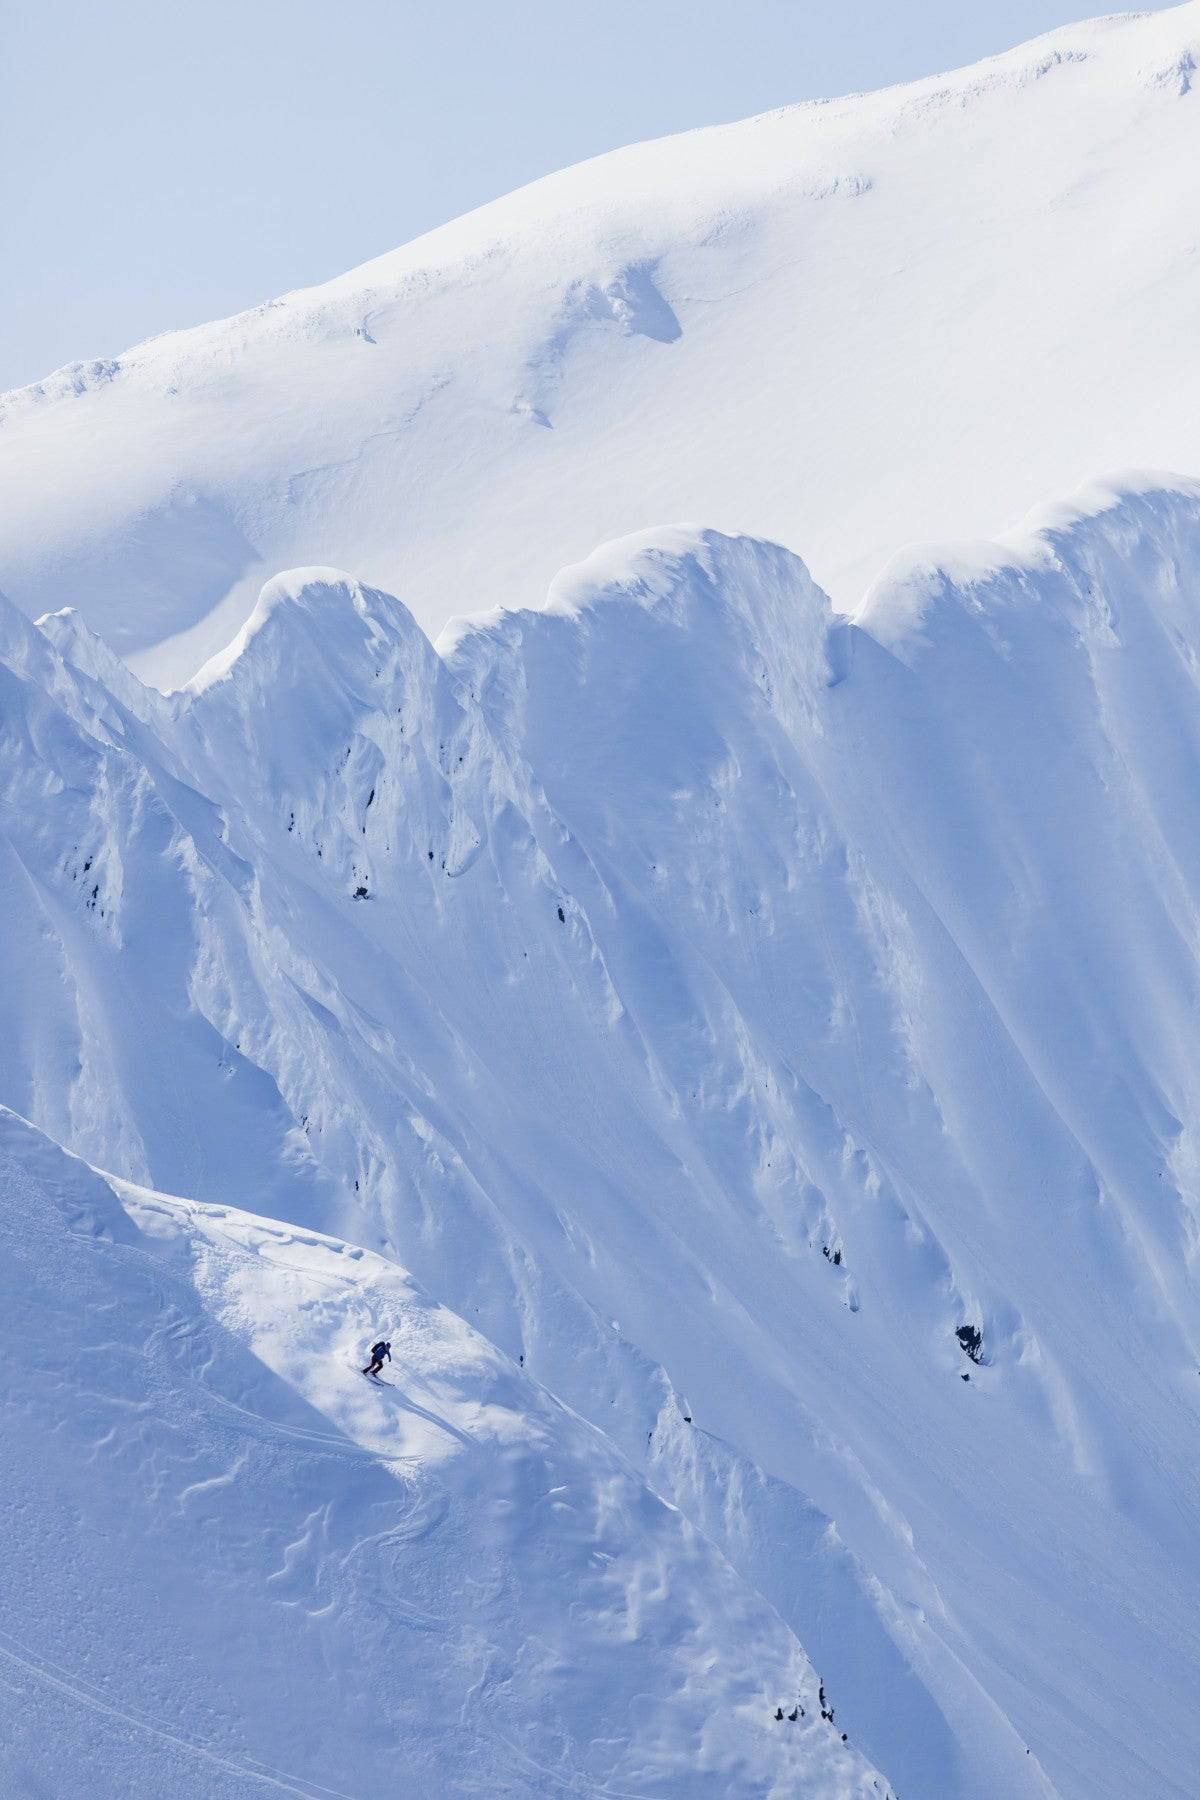 Backcountry Skiing In The Chugach Mountains - Powderaddicts